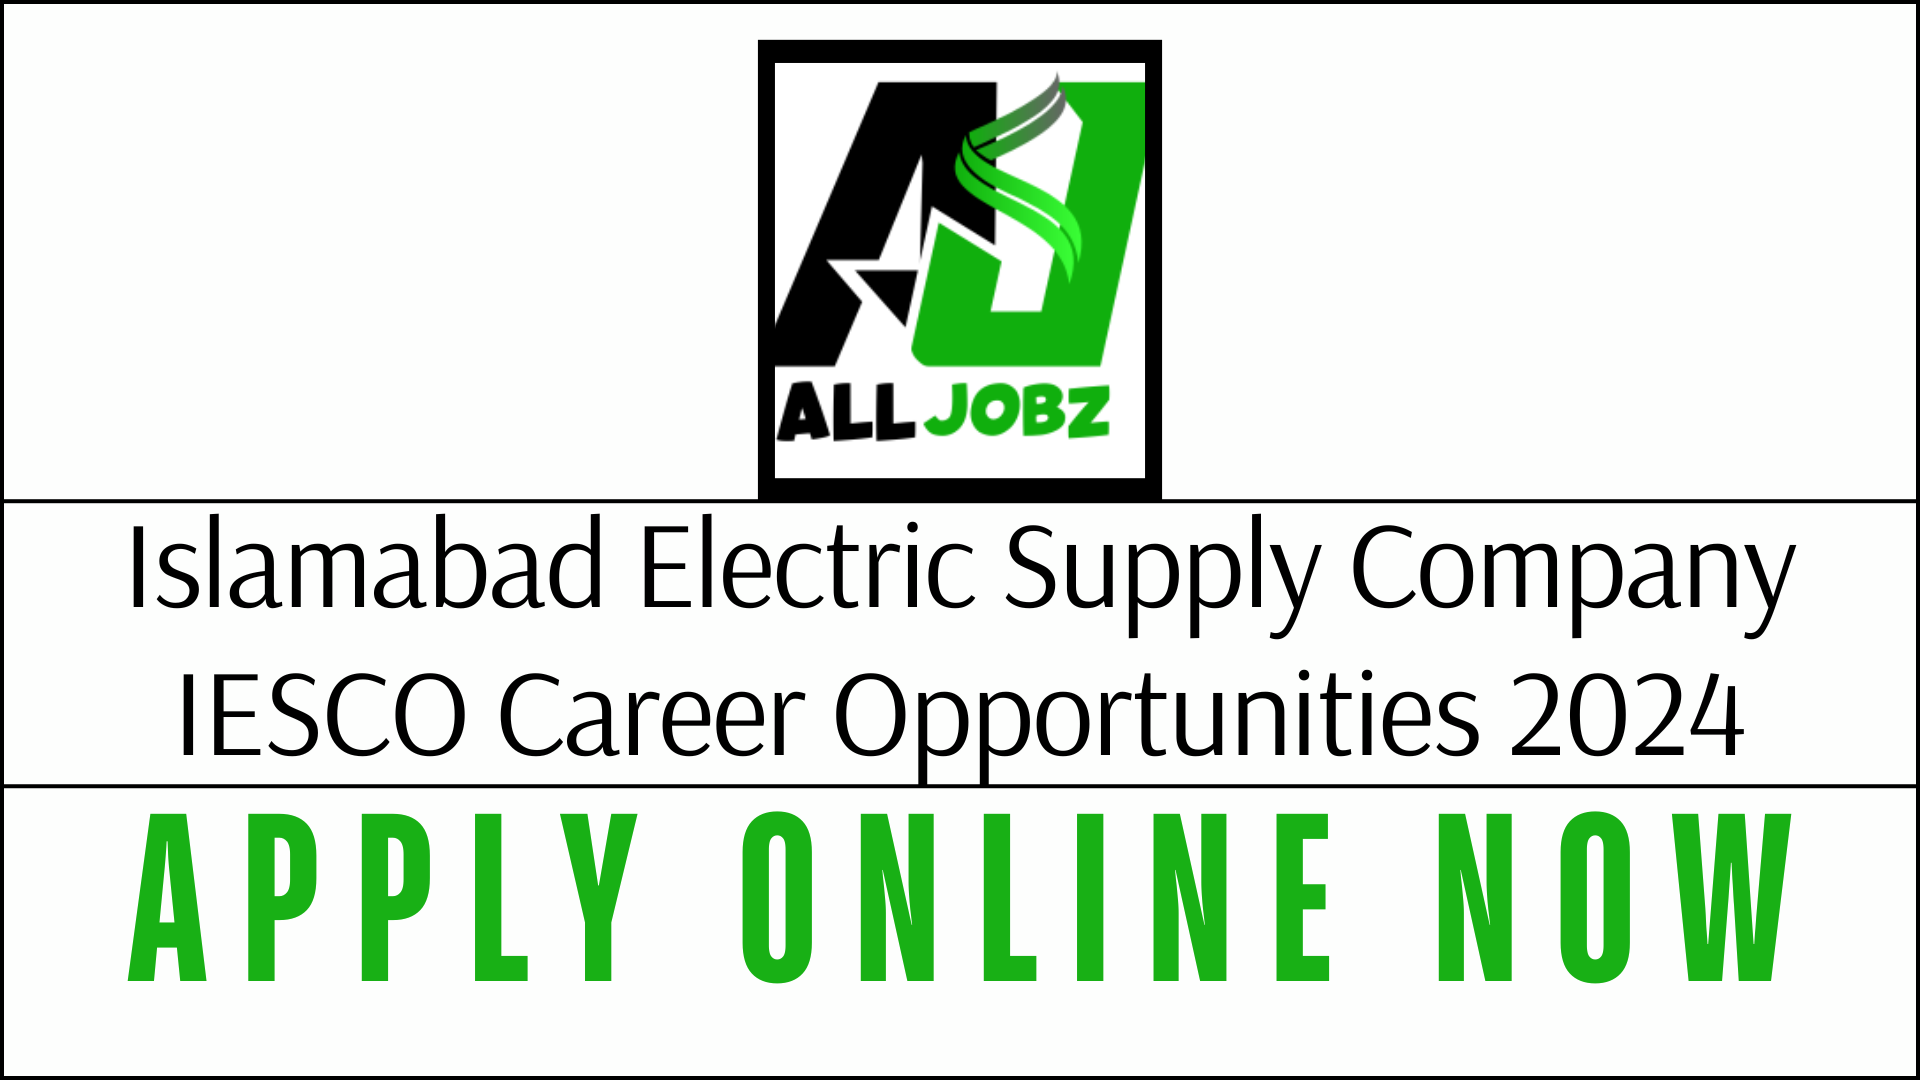 Islamabad Electric Supply Company Iesco Career Opportunities 2024